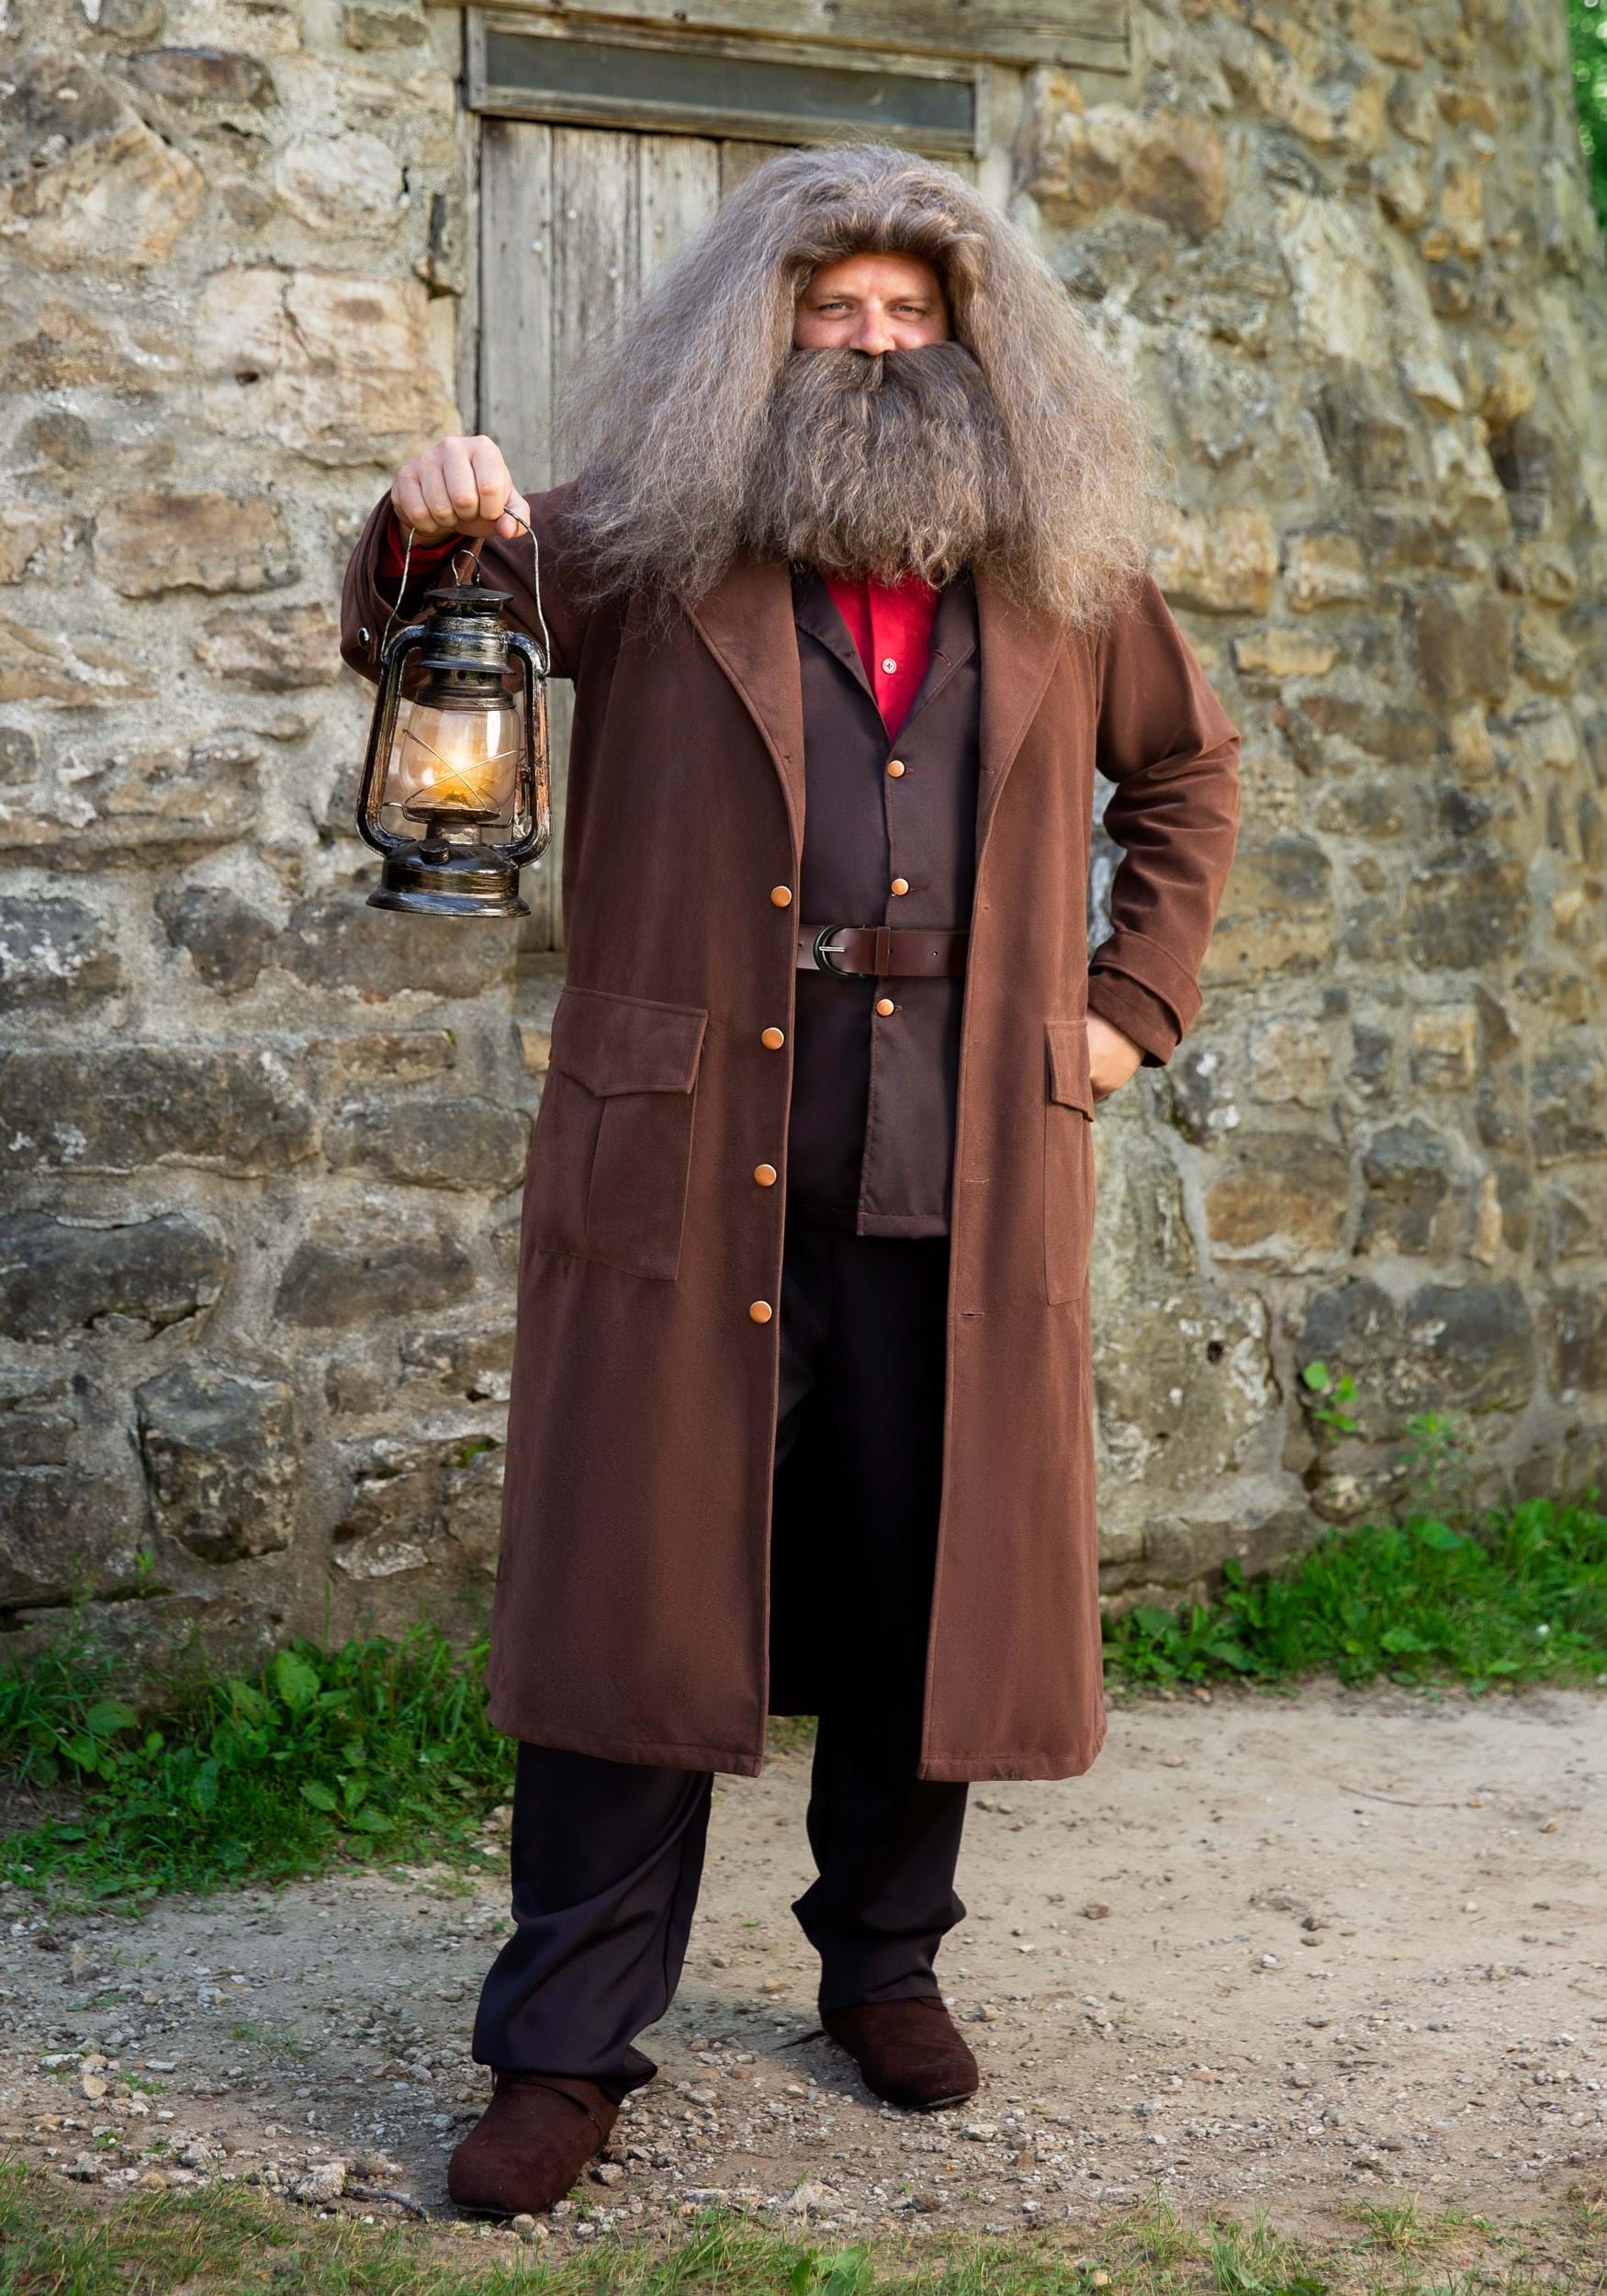 https://images.halloweencostumes.ca/products/64171/1-1/deluxe-harry-potter-hagrid-mens-costume.jpg